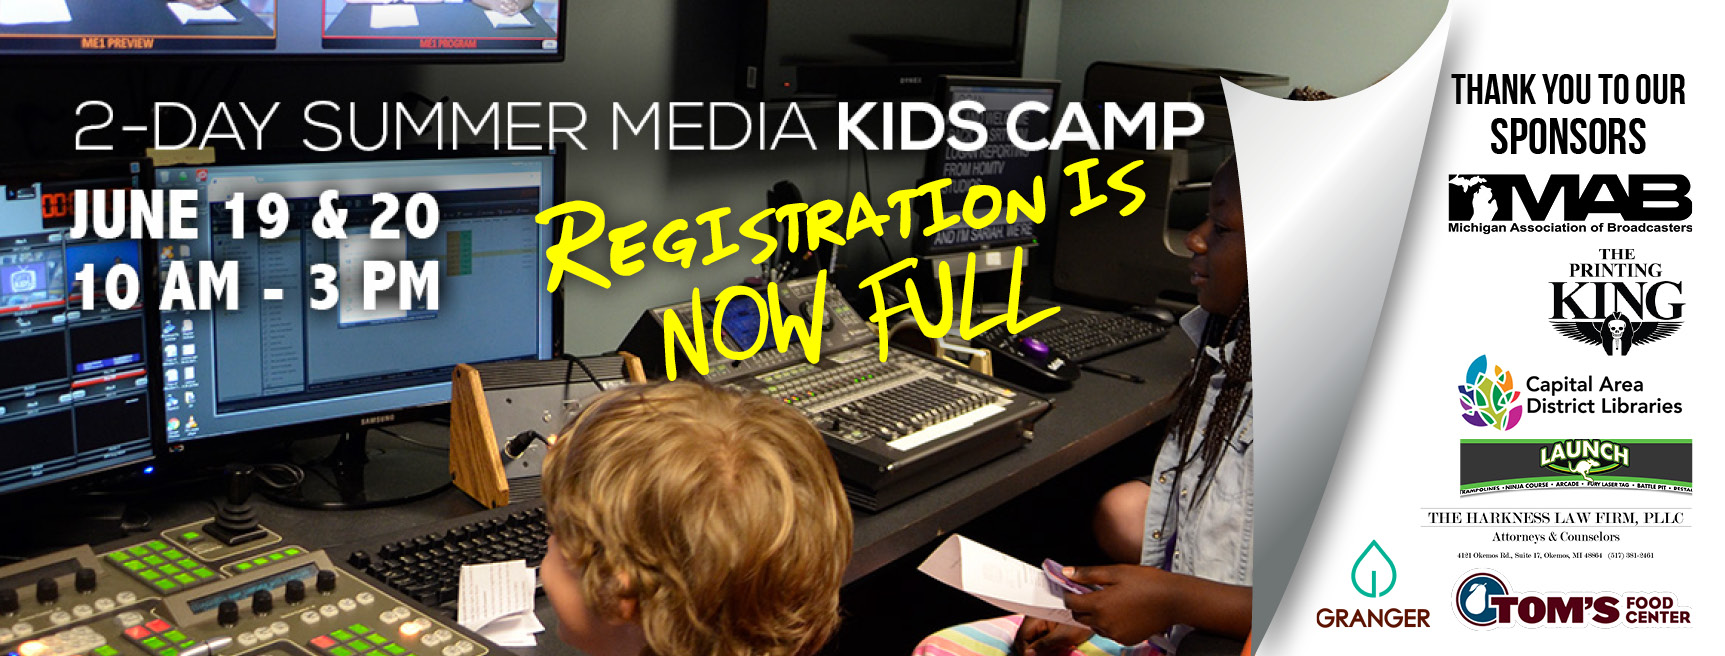 HOMTV Offers Kids an Opportunity to Explore Different Aspects of Television